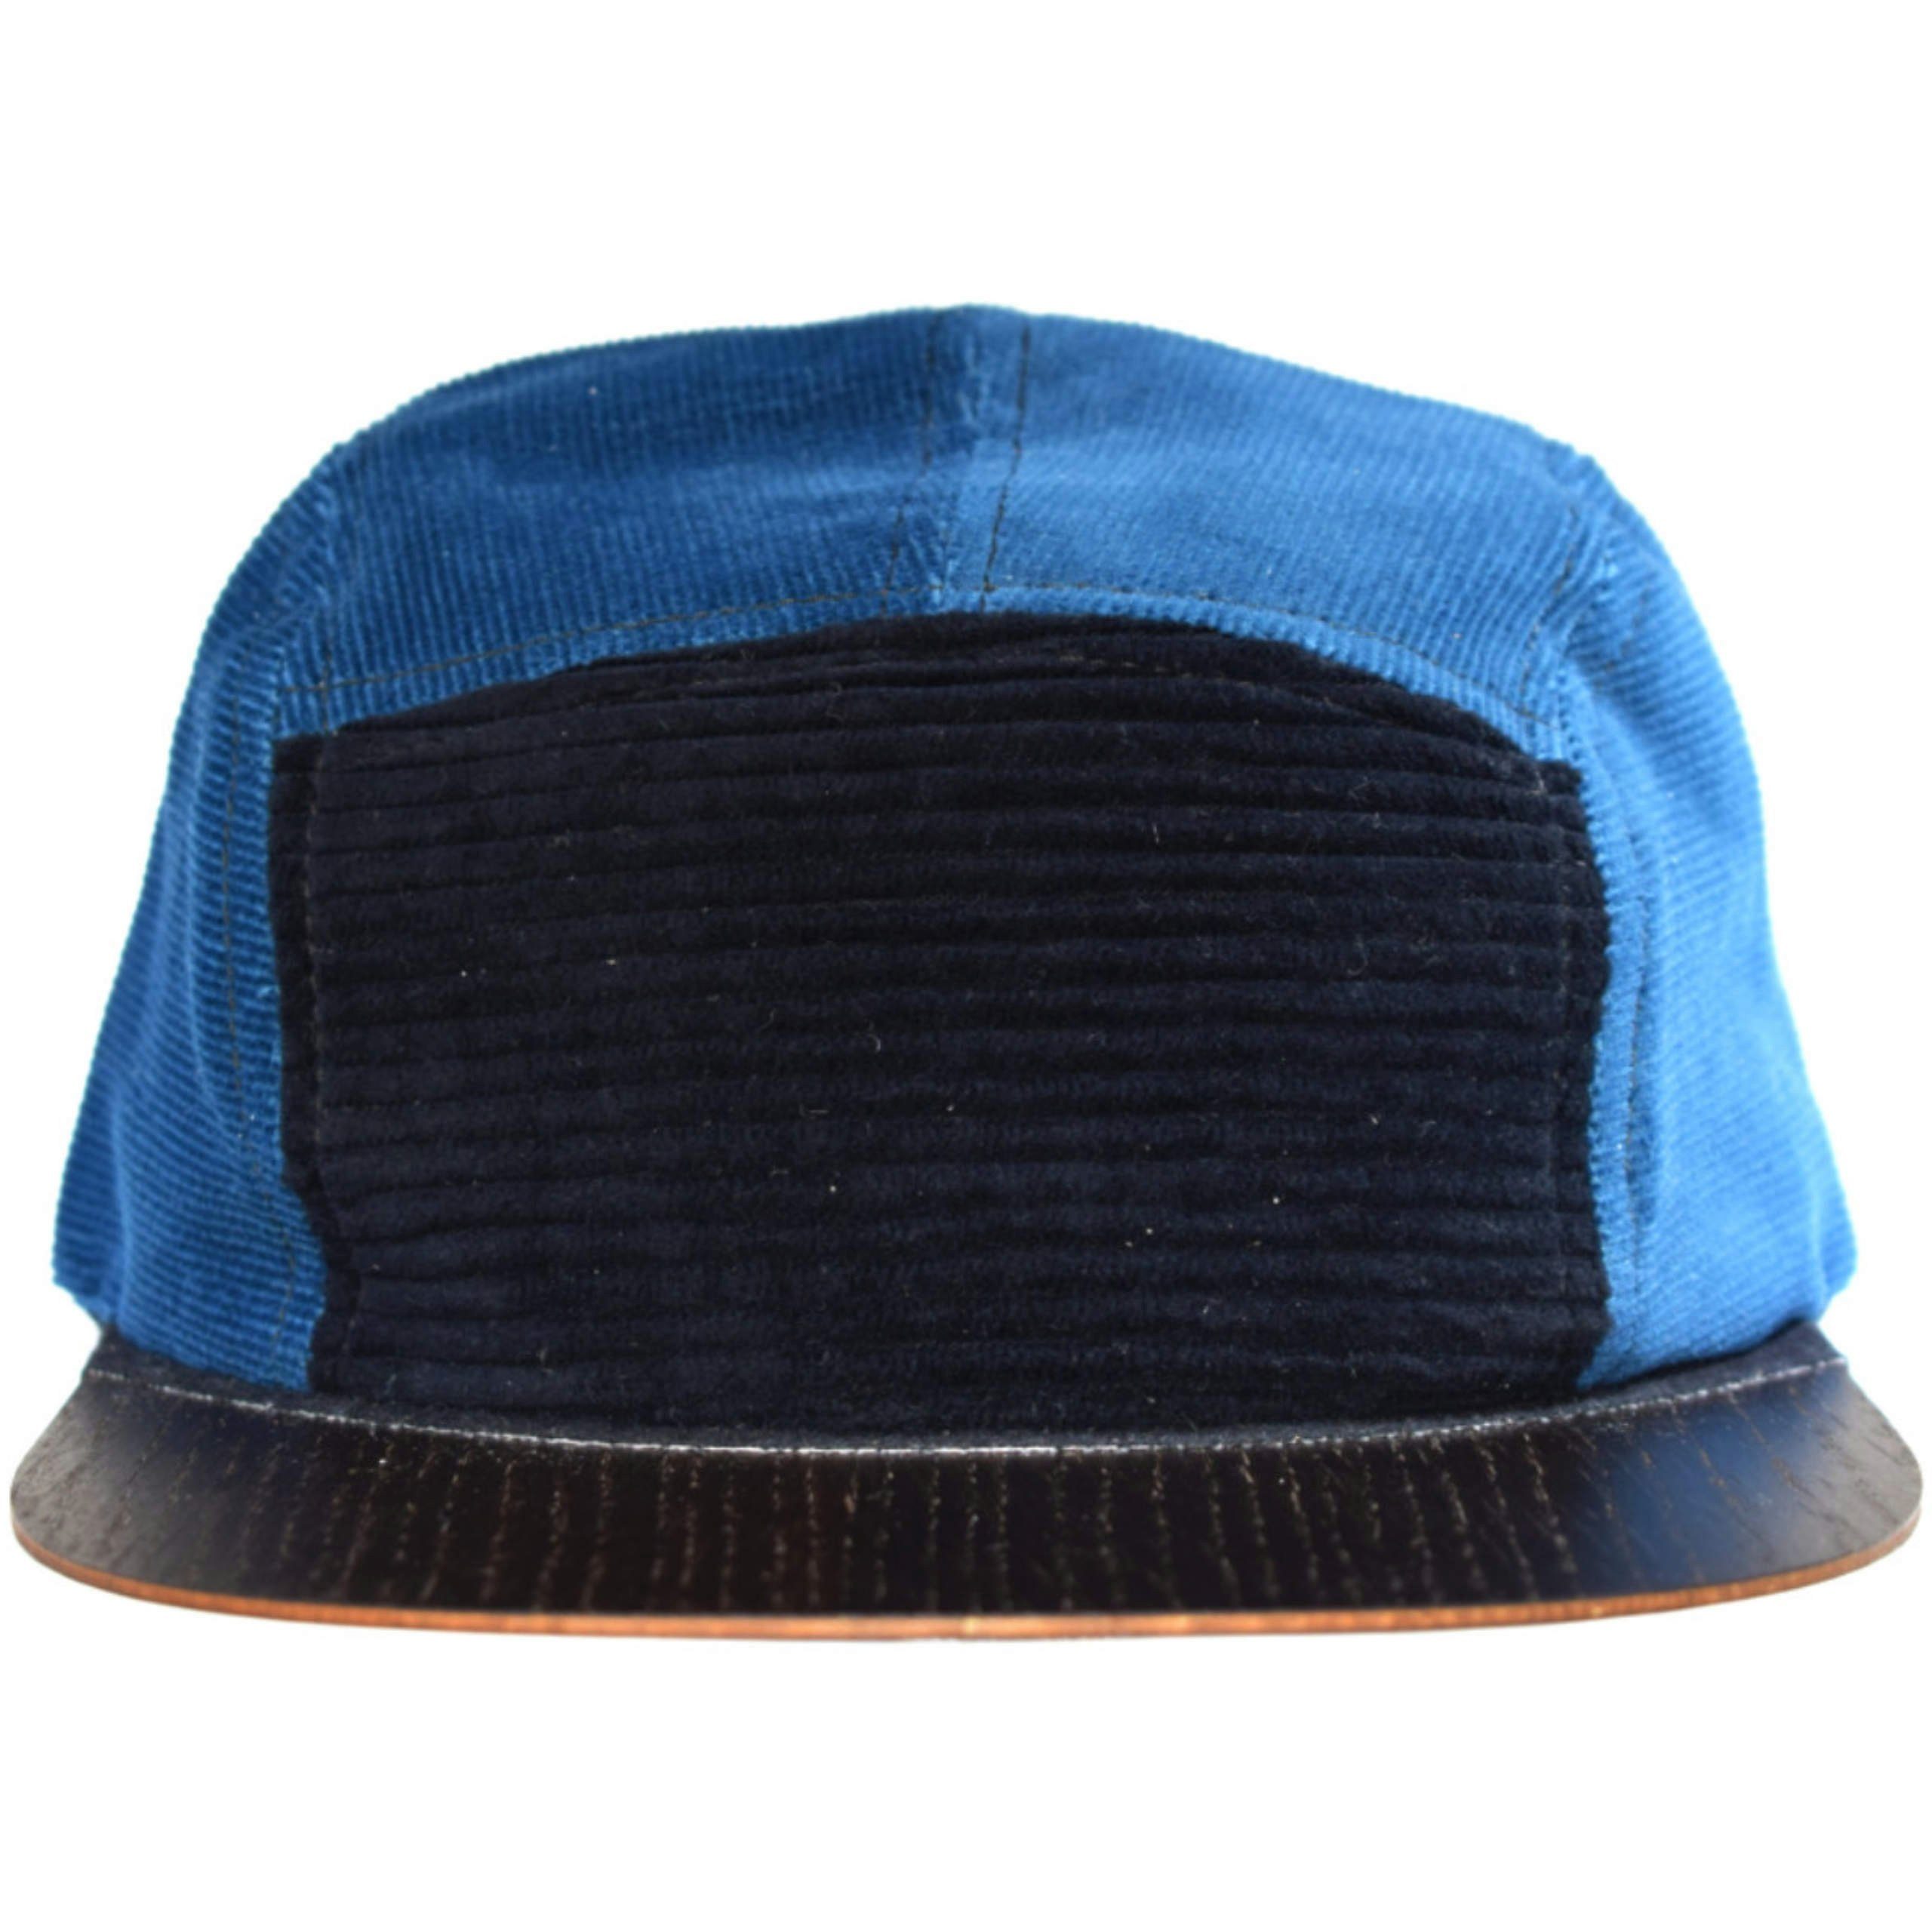 Lou-i Snapback Cap Cord Holzschild in Holzschild Blau mit Germany Made Cap